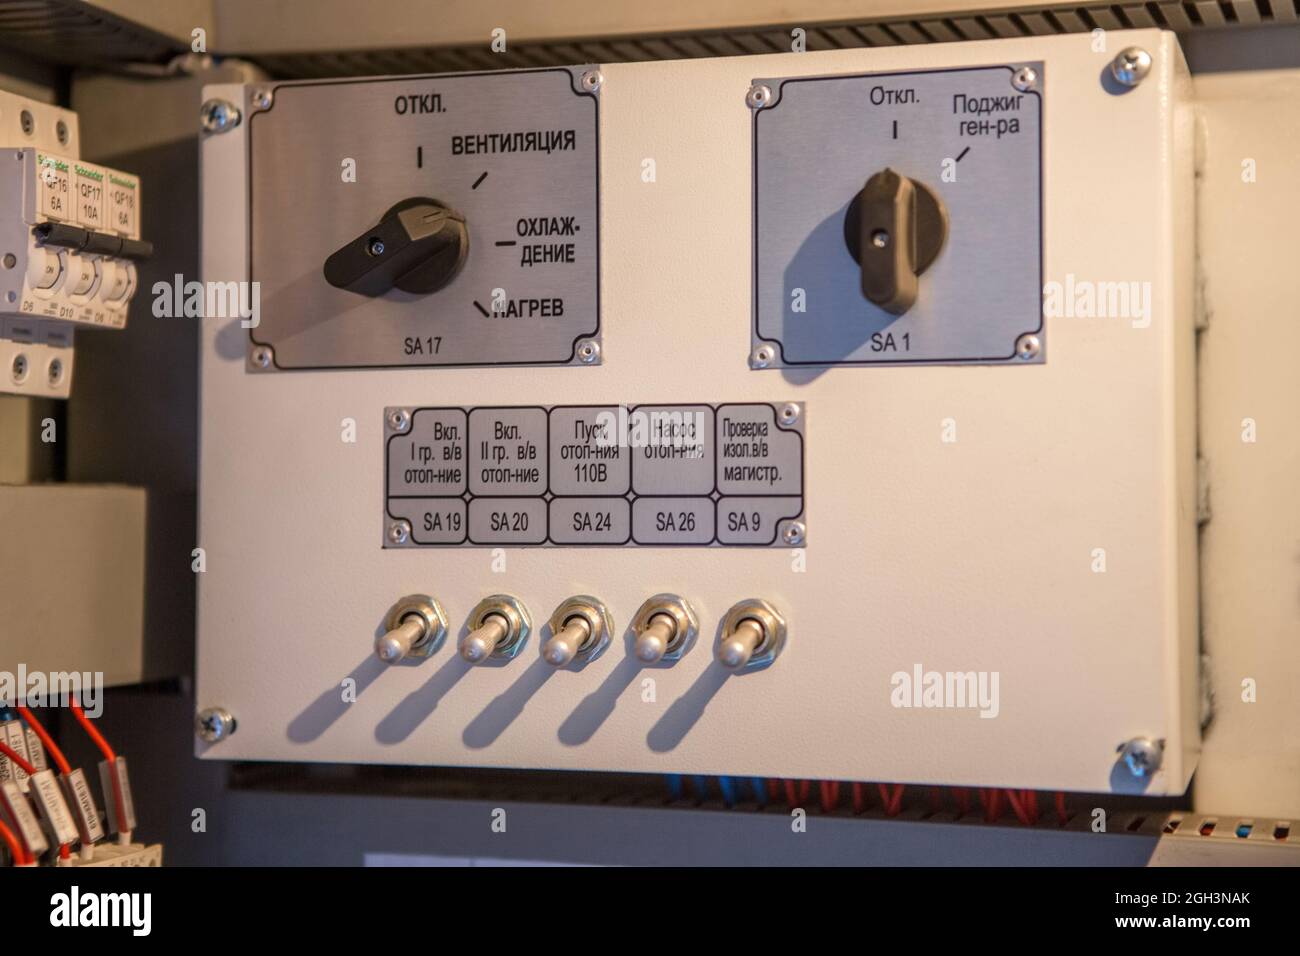 Typical Console for controlling the passenger train car systems. Controll console of sleeping car systems of a railway train. Stock Photo